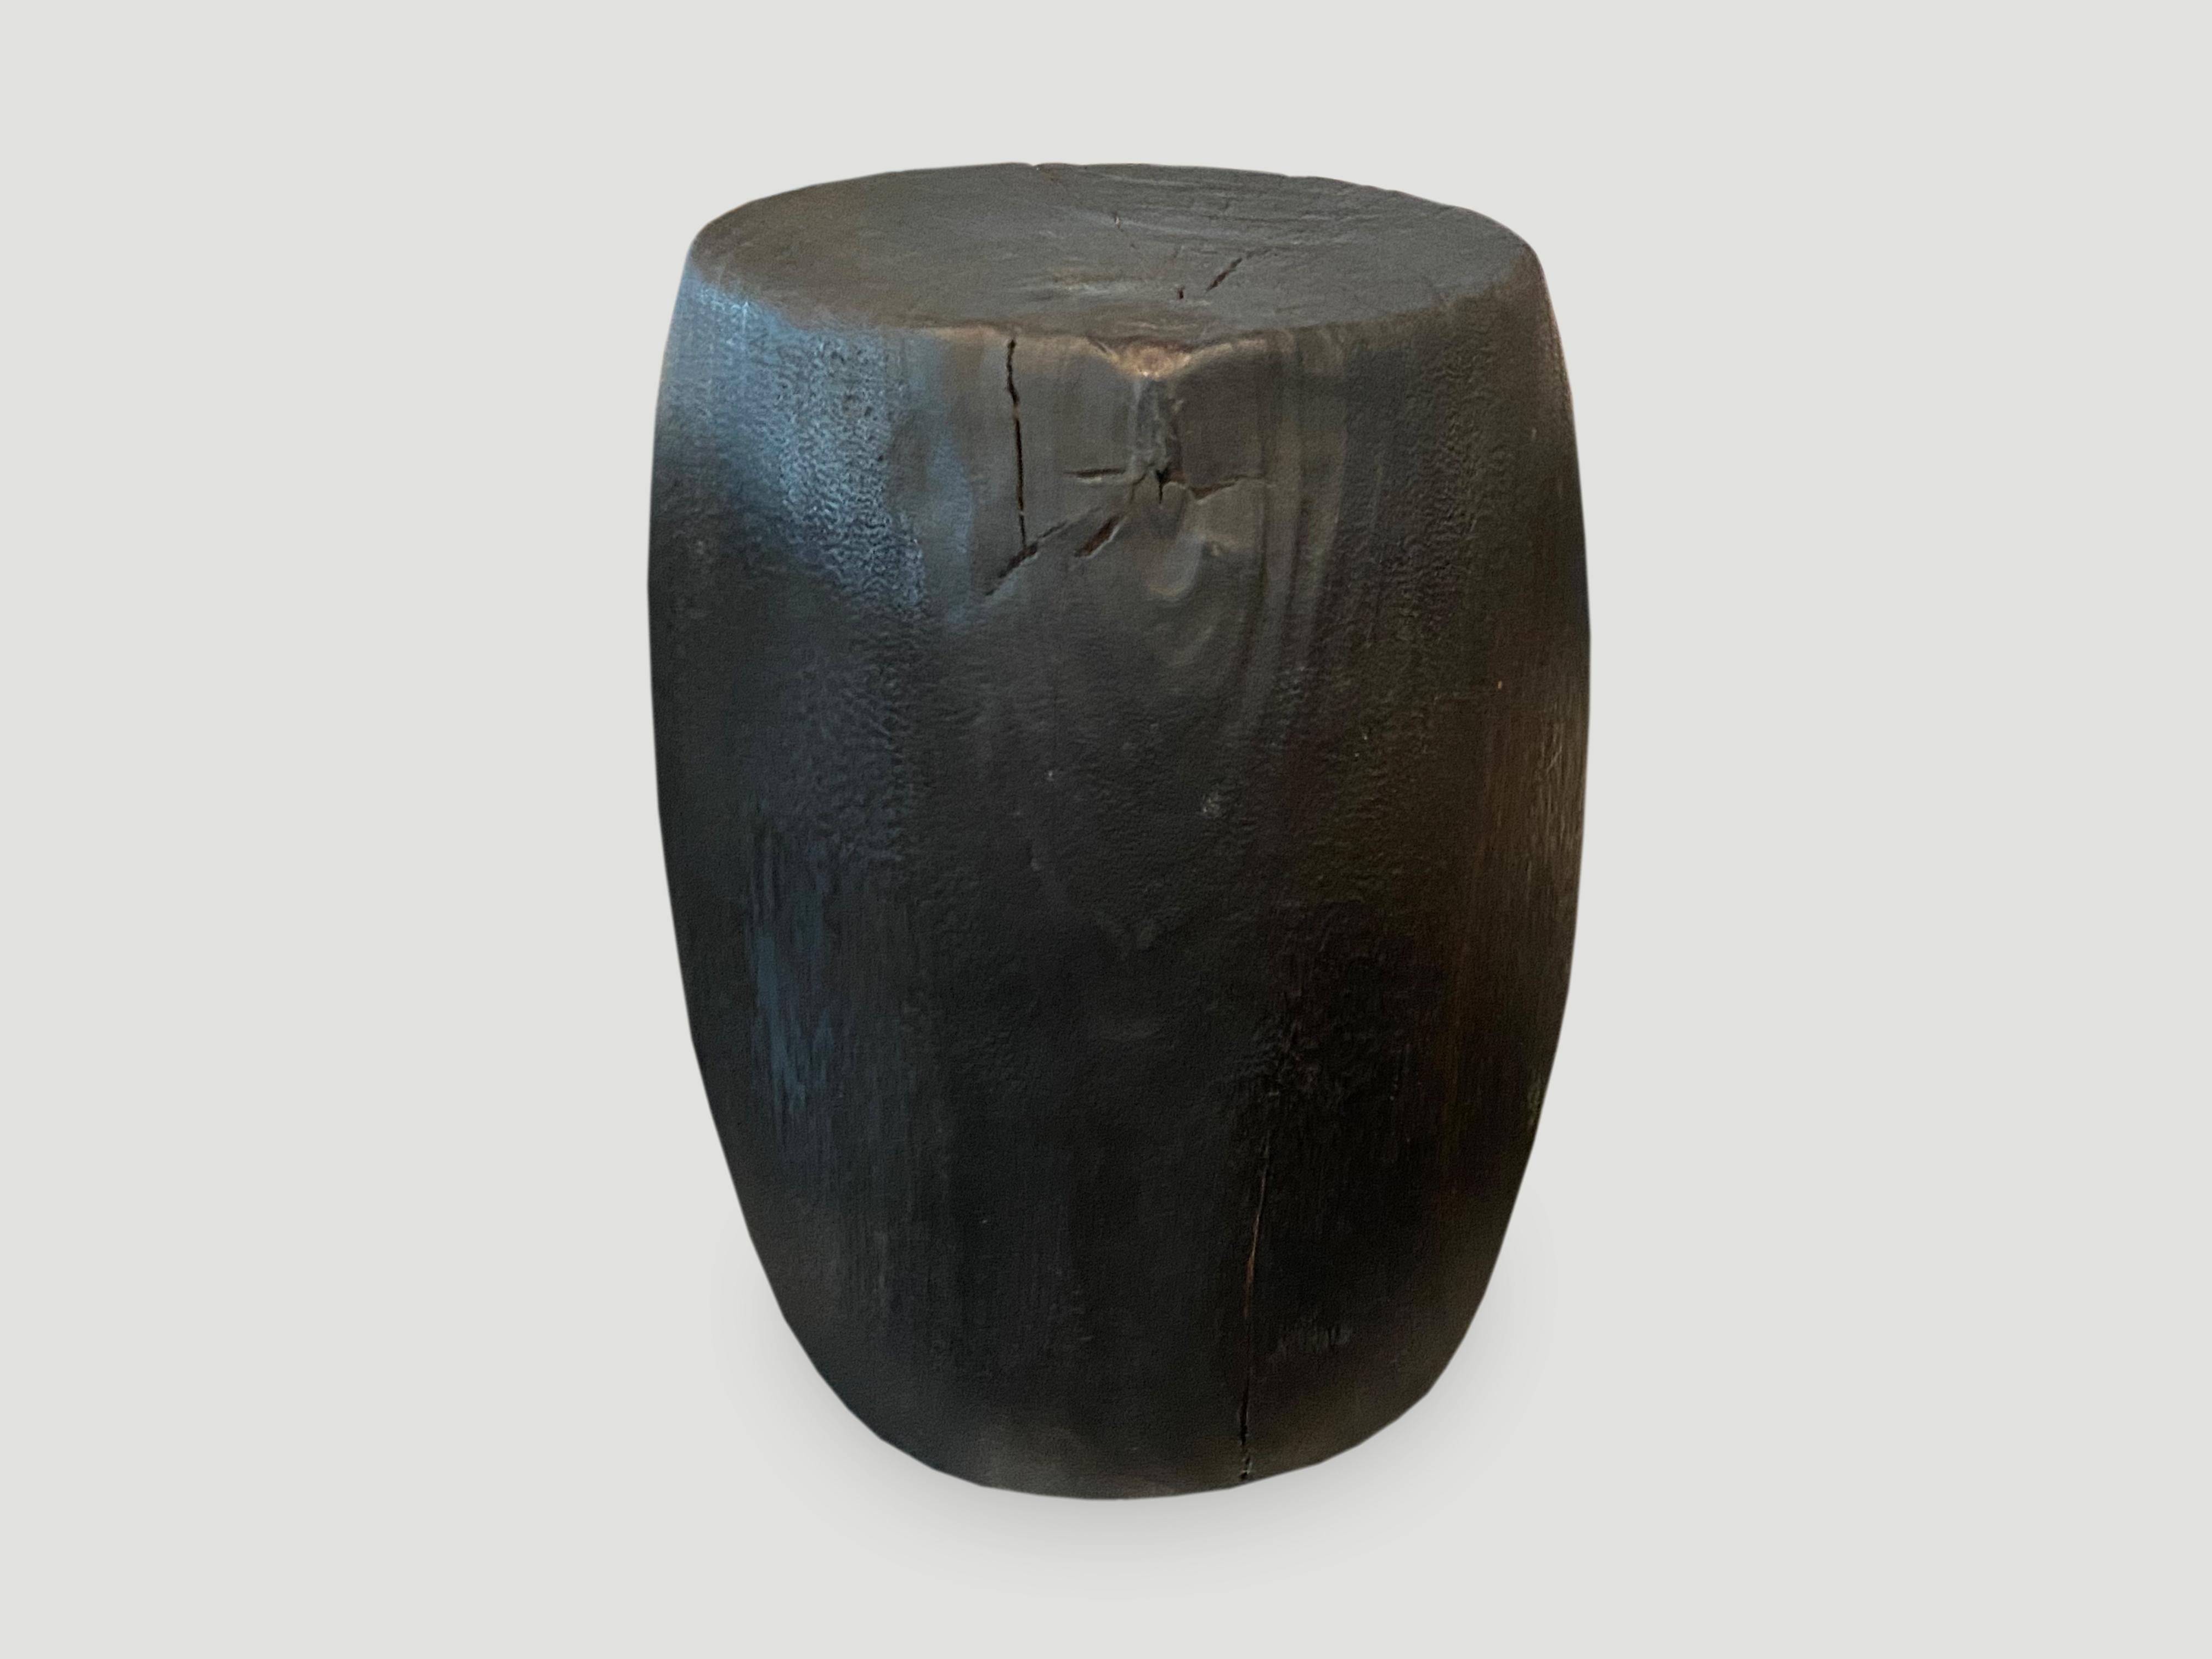 Hand carved drum shape reclaimed lychee wood side table or stool. Charred, sanded and sealed revealing the beautiful wood grain. Custom stains and finishes available. Please inquire.

The Triple Burnt Collection represents a unique line of modern